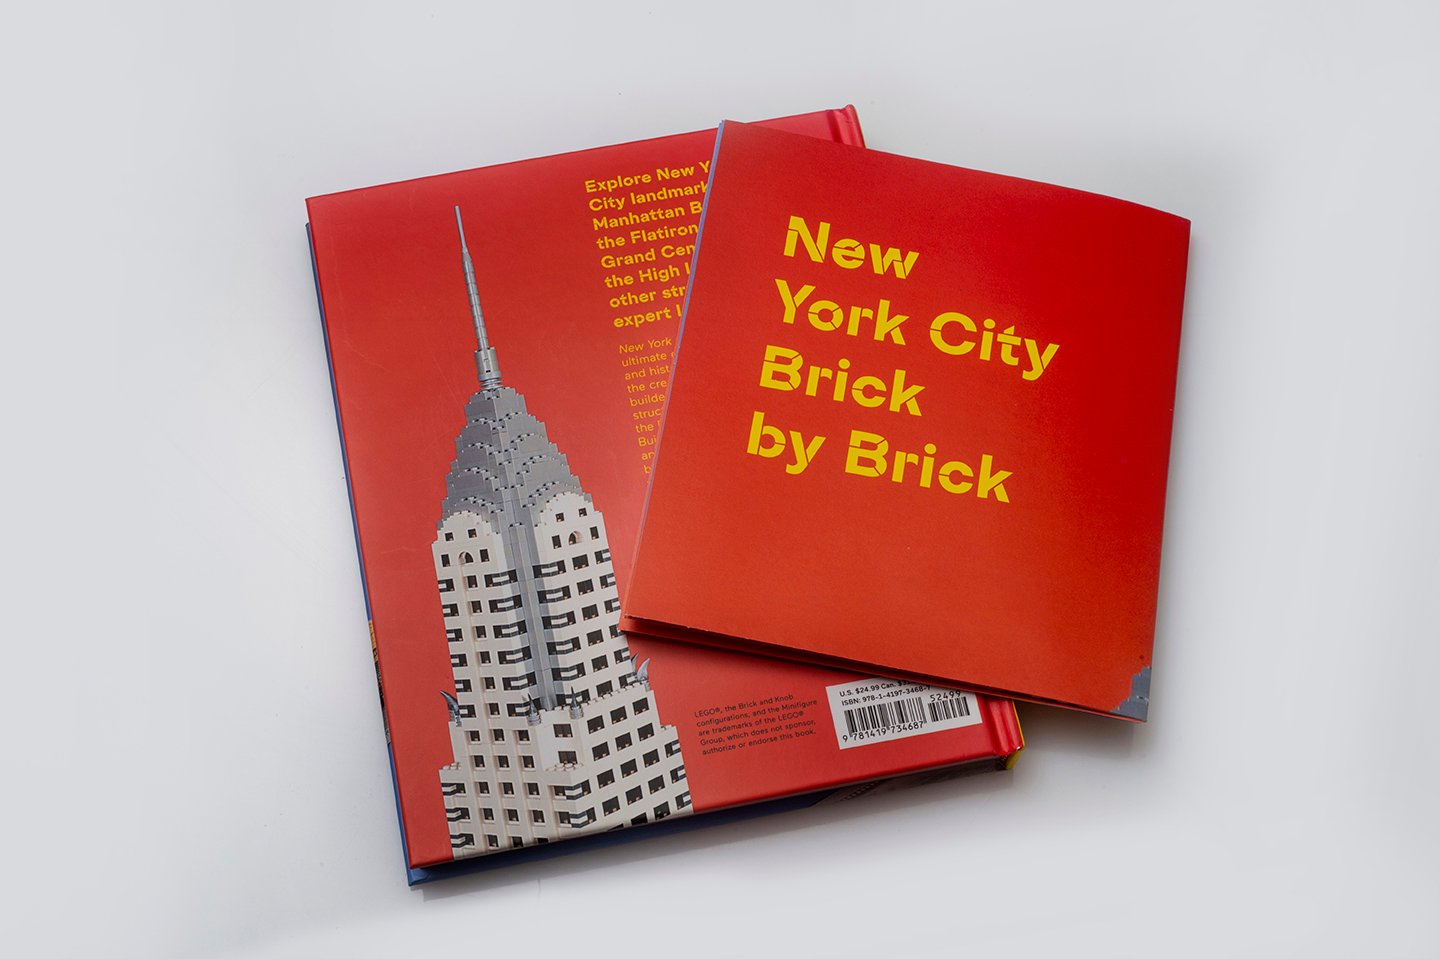 The back cover of NYC Brick by Brick